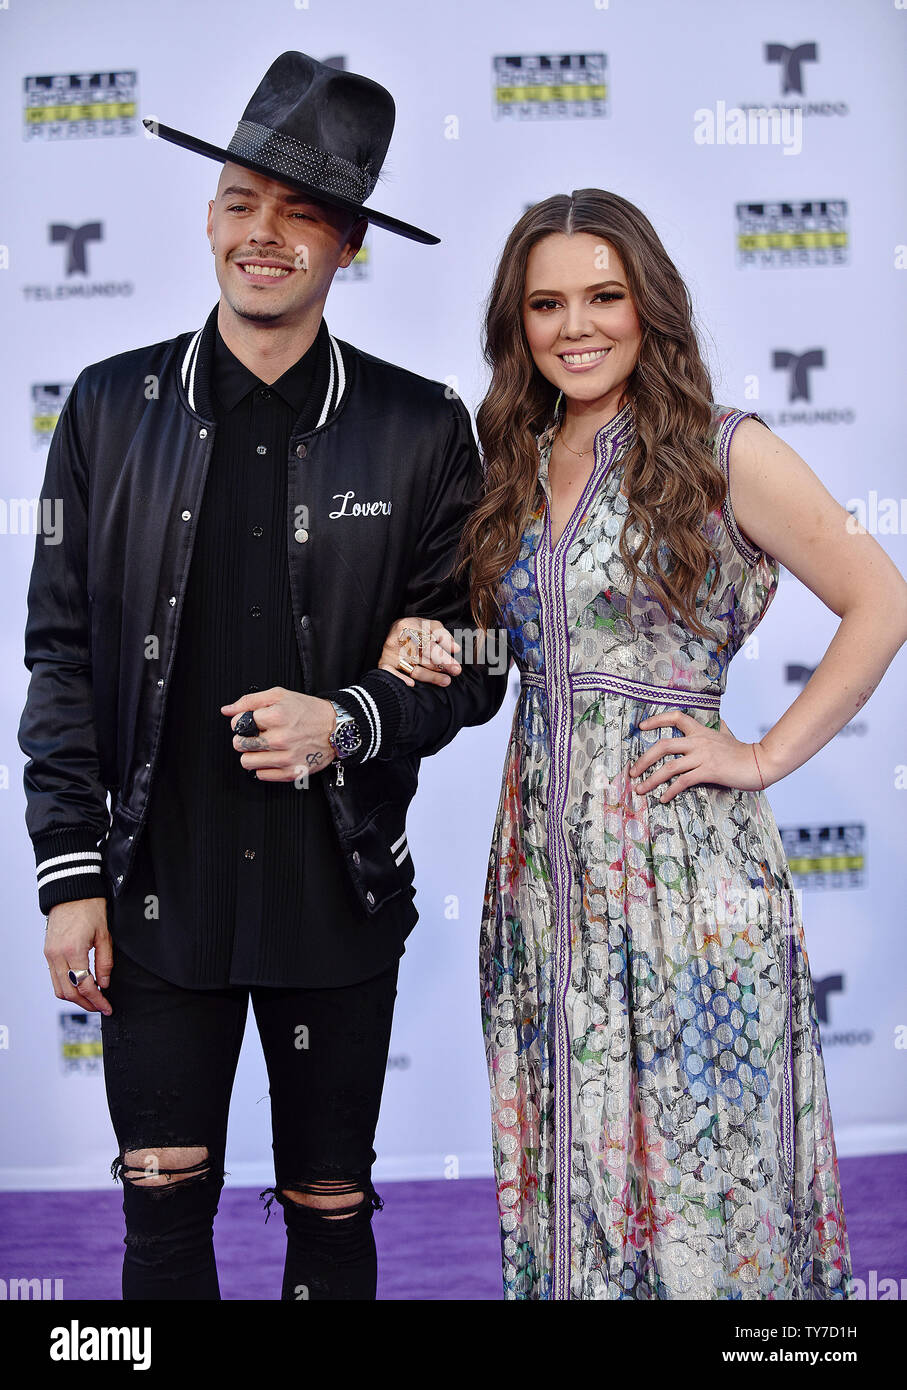 Gastvrijheid totaal strijd Mexican pop duo Jesse & Joy arrive for the Latin American Music Awards 2017  at Hollywood's Dolby Theatre in Los Angeles on October 26, 2017. Photo by  Christine Chew/UPI Stock Photo - Alamy